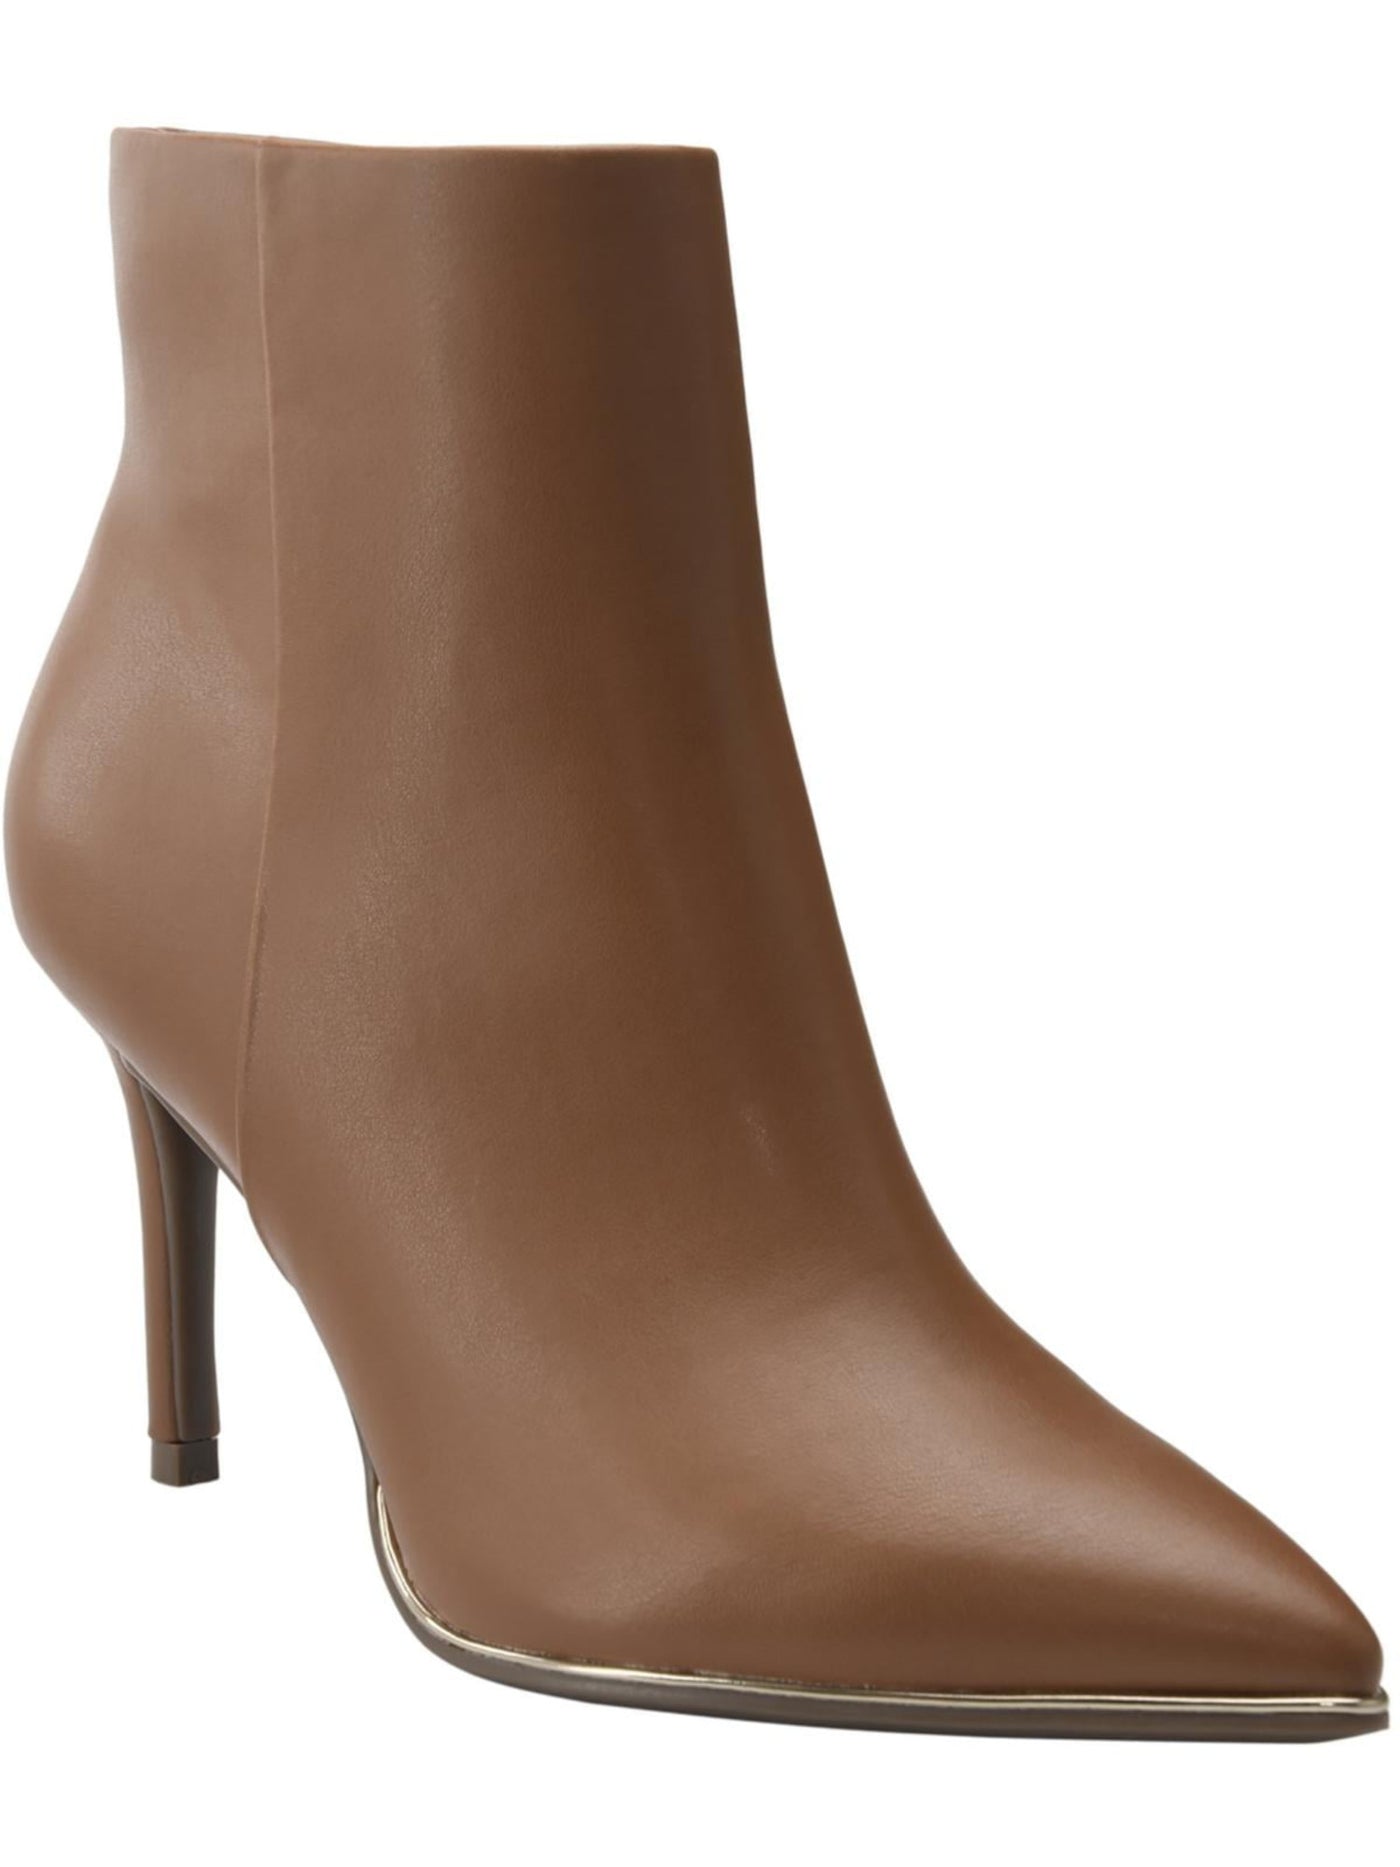 MARC FISHER Womens Dark Natural Brown Padded Dalla Pointed Toe Stiletto Zip-Up Dress Booties 6 M